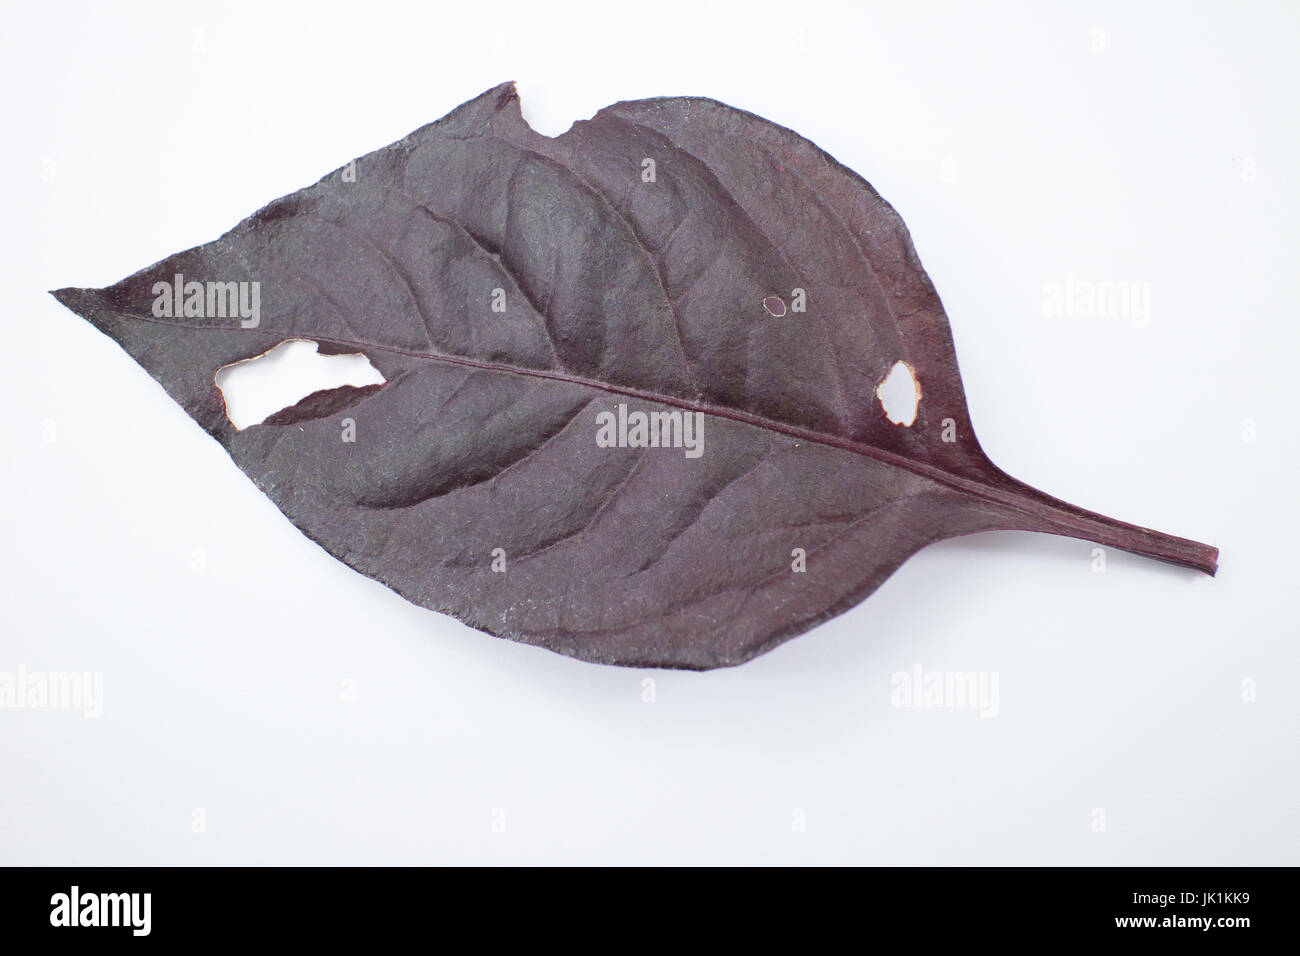 Disease Red leaf of Red Ivy or Red flame ivy or Hemigraphis alternata isolated on white background Stock Photo